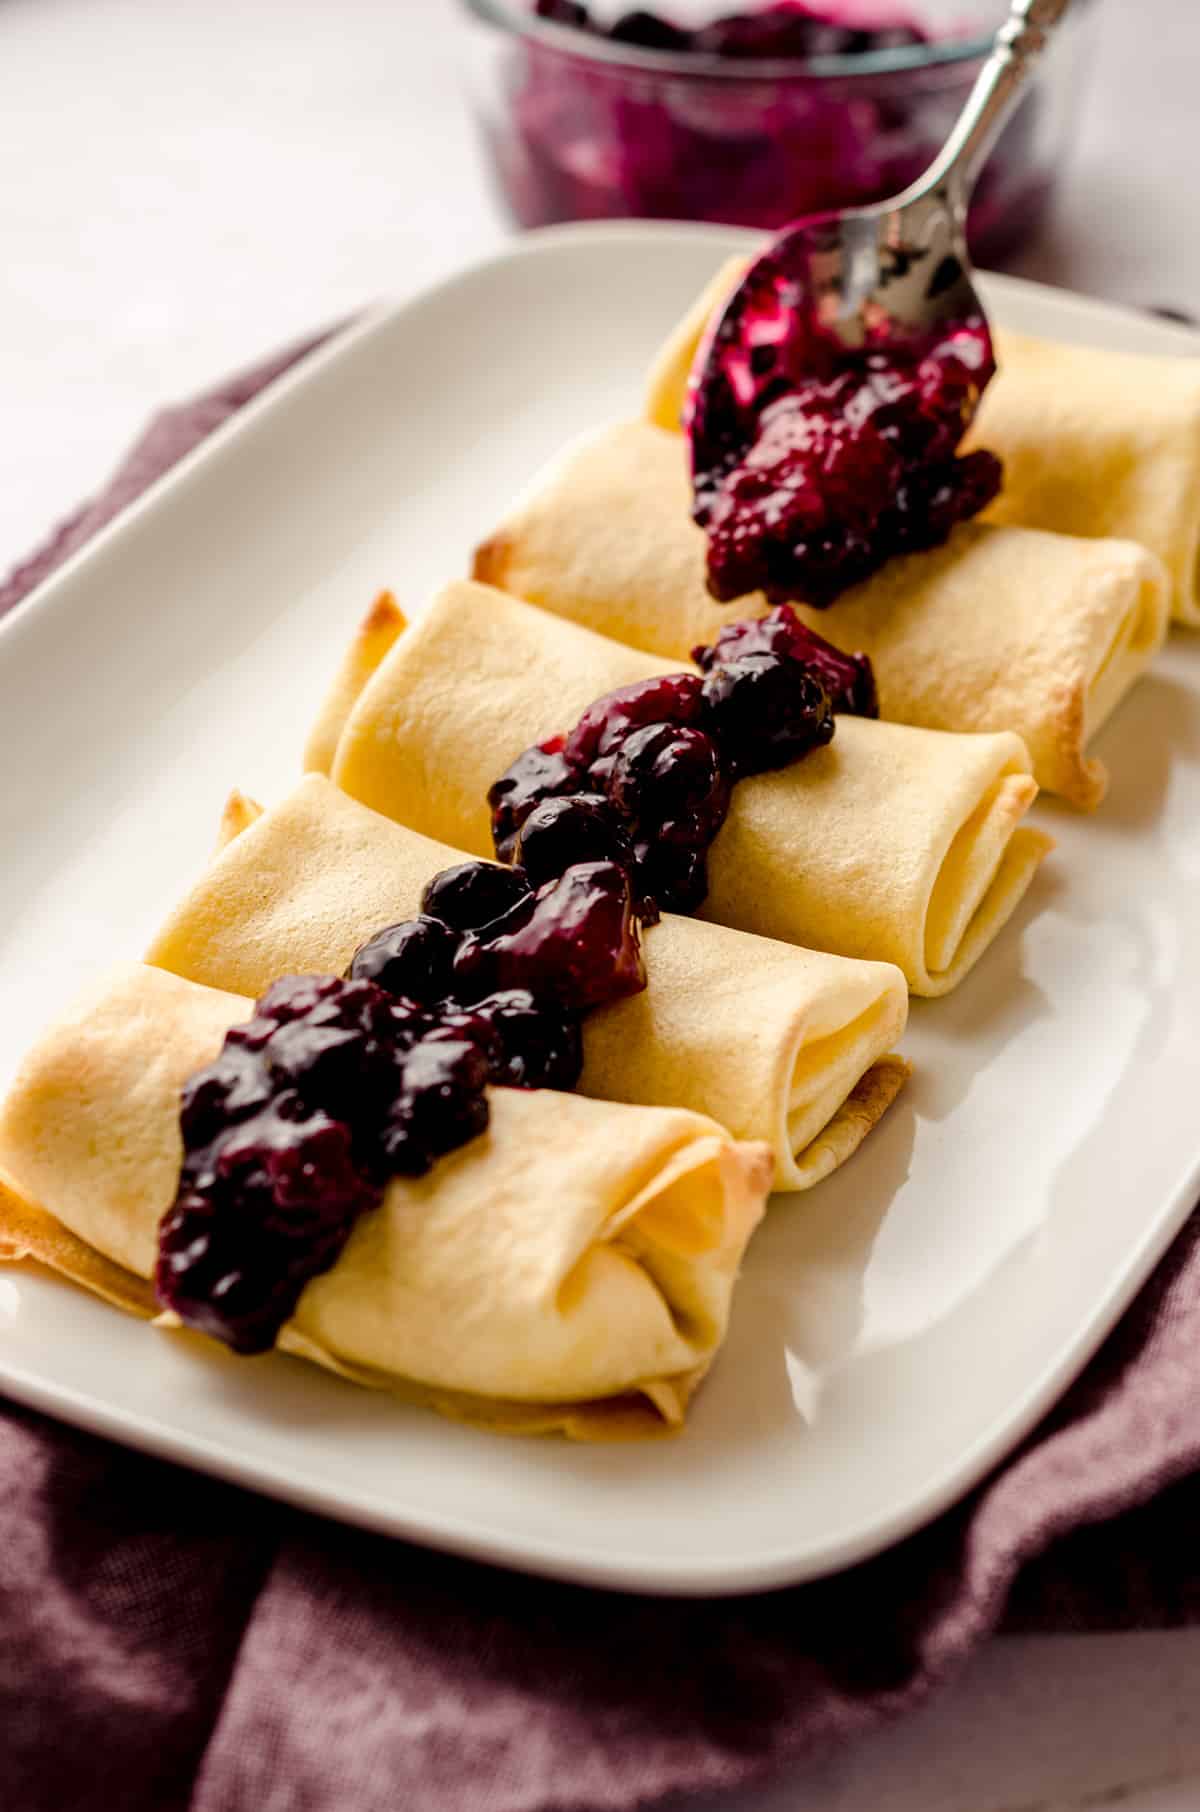 Spooning berry compote over a platter of cheese blintzes.